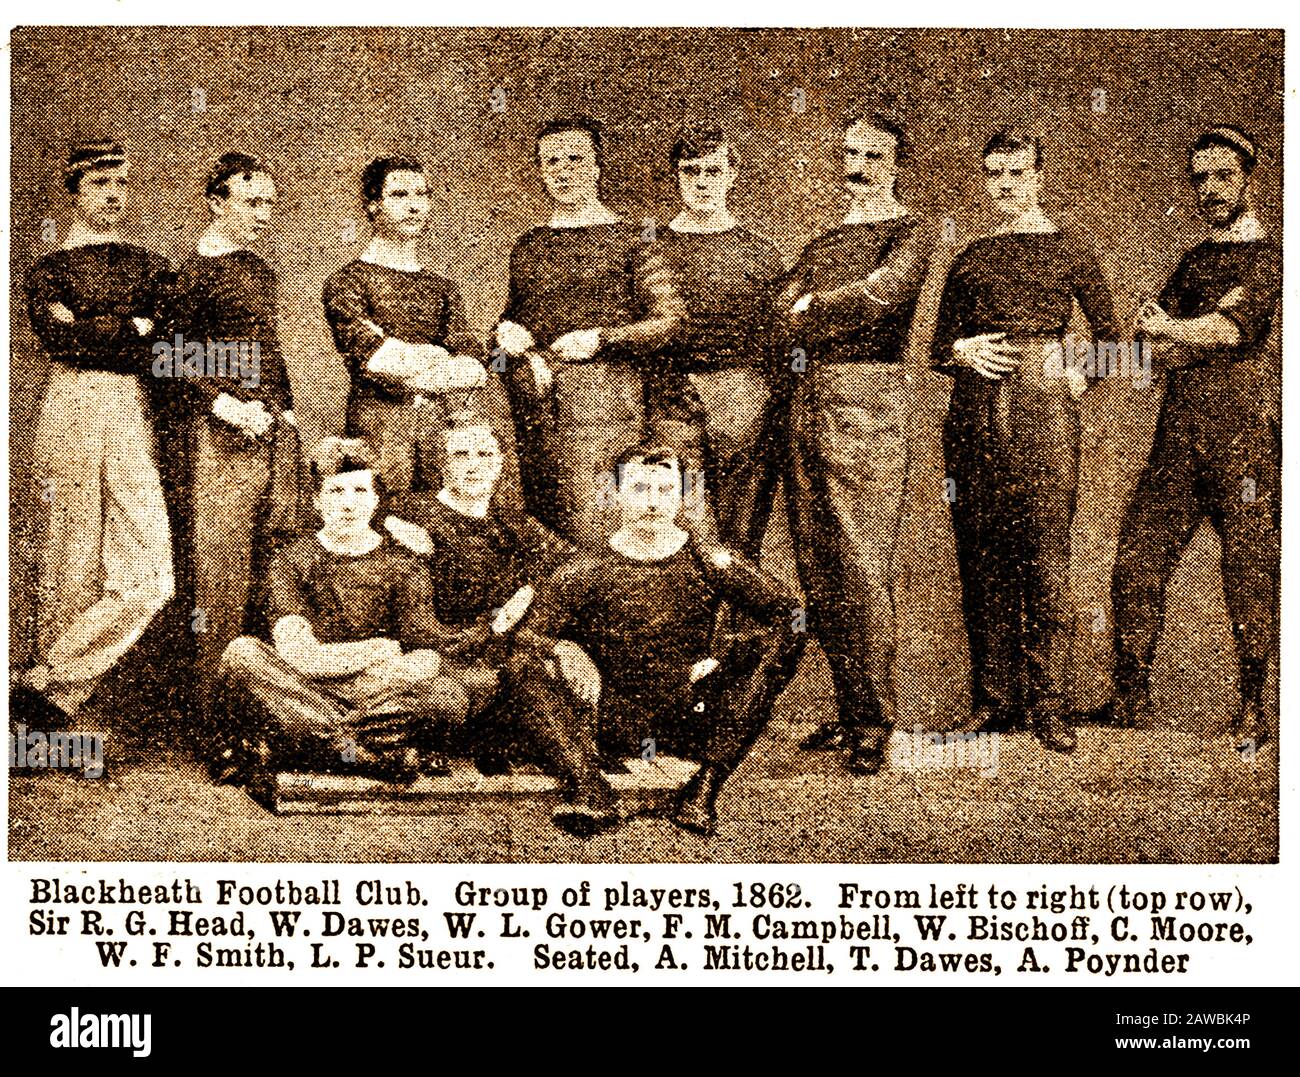 A rare early printed image of Blackheath  Rugby Football Club team  (LondUK)  in 1862   with players names. Sir R G Head, W Dawes, W L  Gower, F M  Campbell, W Bischoff, C Moore, W F Smith, L P Sueur, A Mitchell, T Dawes & A Poynder. The club is still in existence and holds the title of being the third-oldest rugby club in continuous existence in the world. The club started  in 1858 by old boys of the  Blackheath Proprietary School who played a 'carrying' game of football made popular by Rugby School. The club which was  open to anyone to join was a founder member of The Football Association . Stock Photo